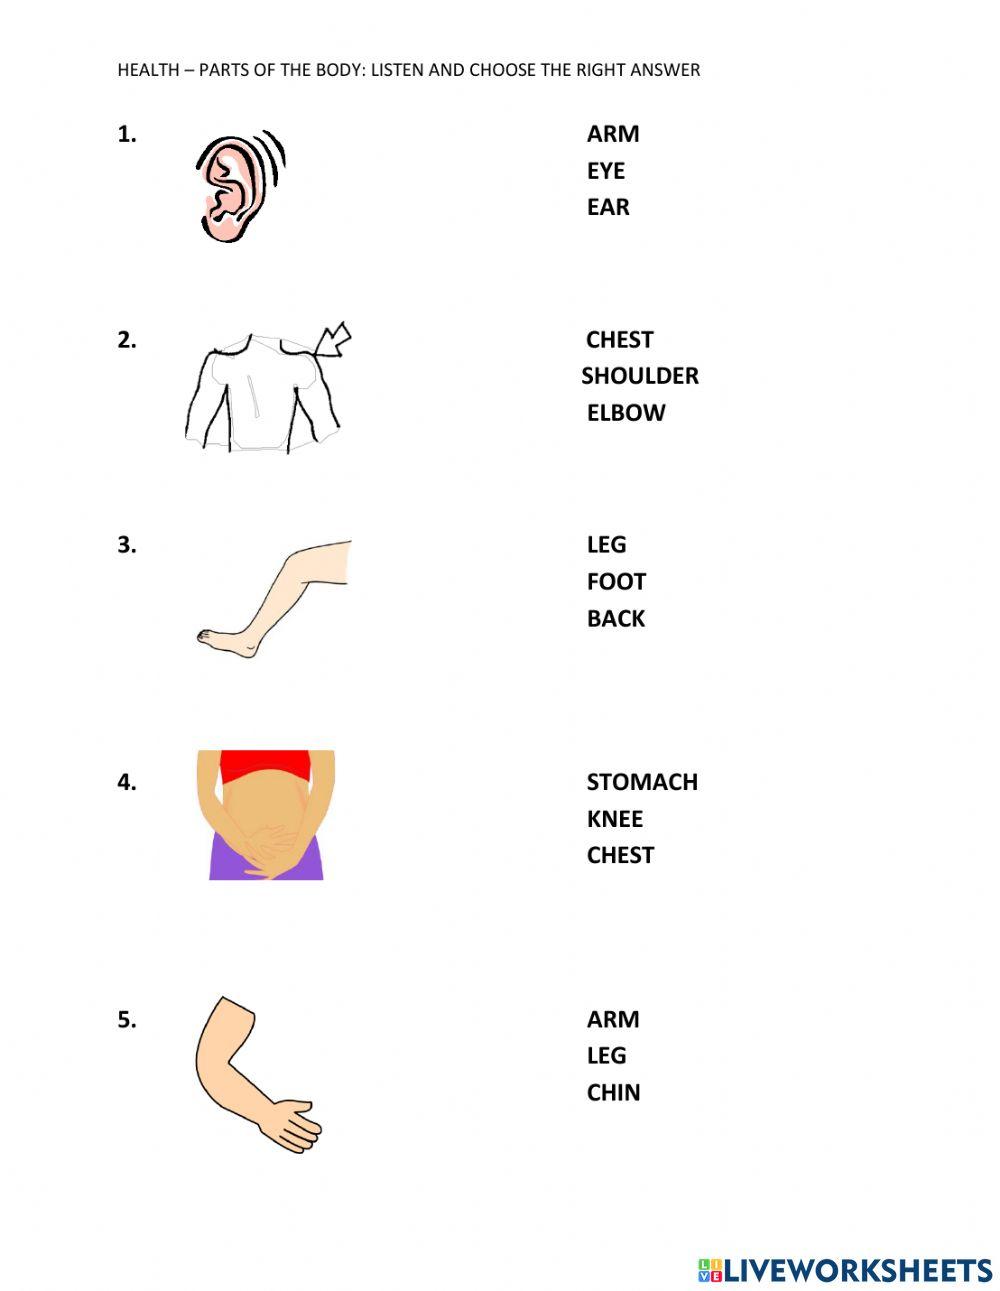 Health - Parts of the Body Ex 1